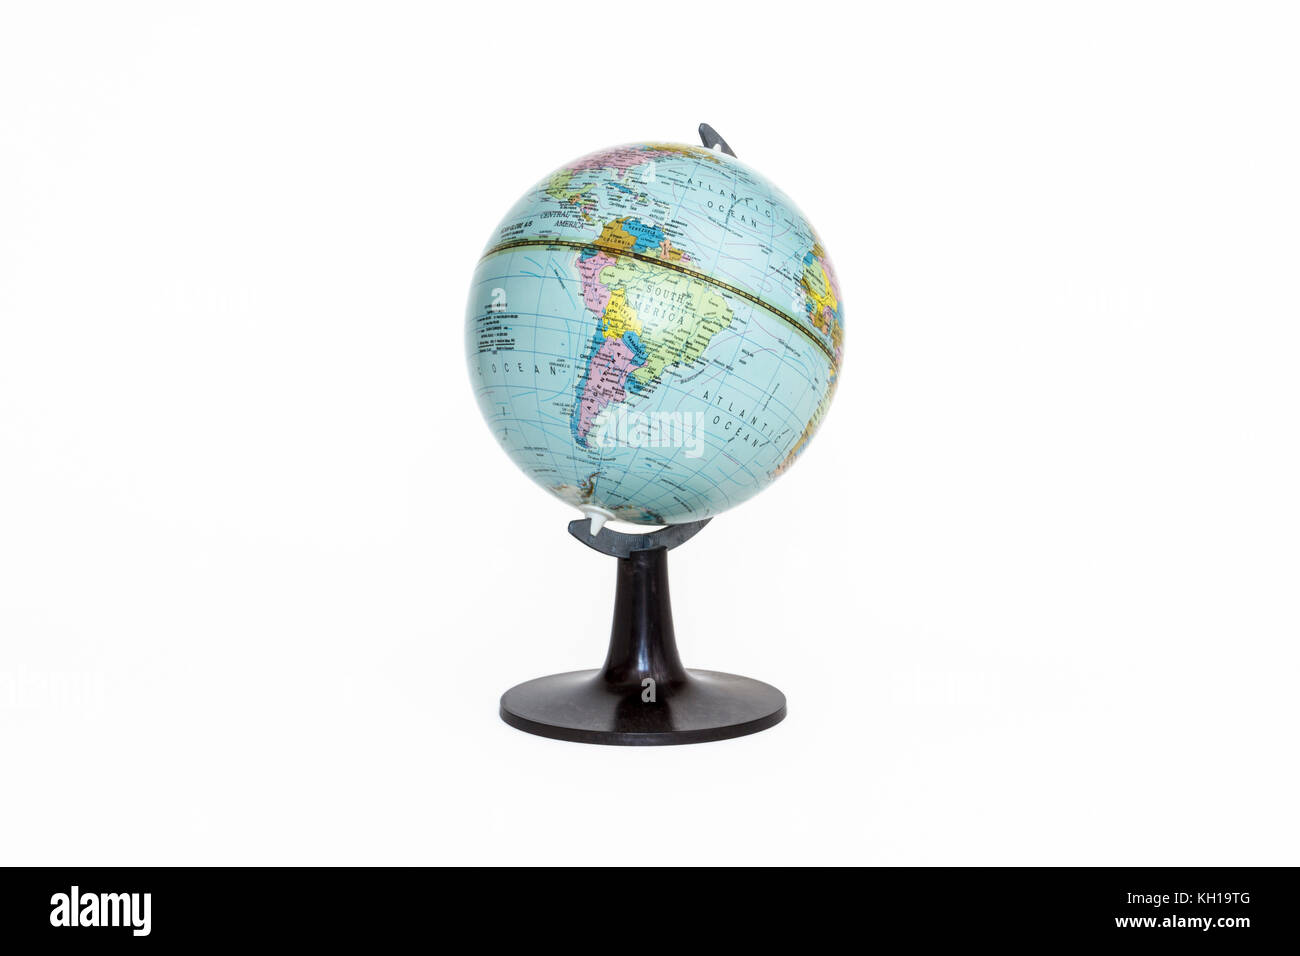 A small geographical globe on a white background Stock Photo